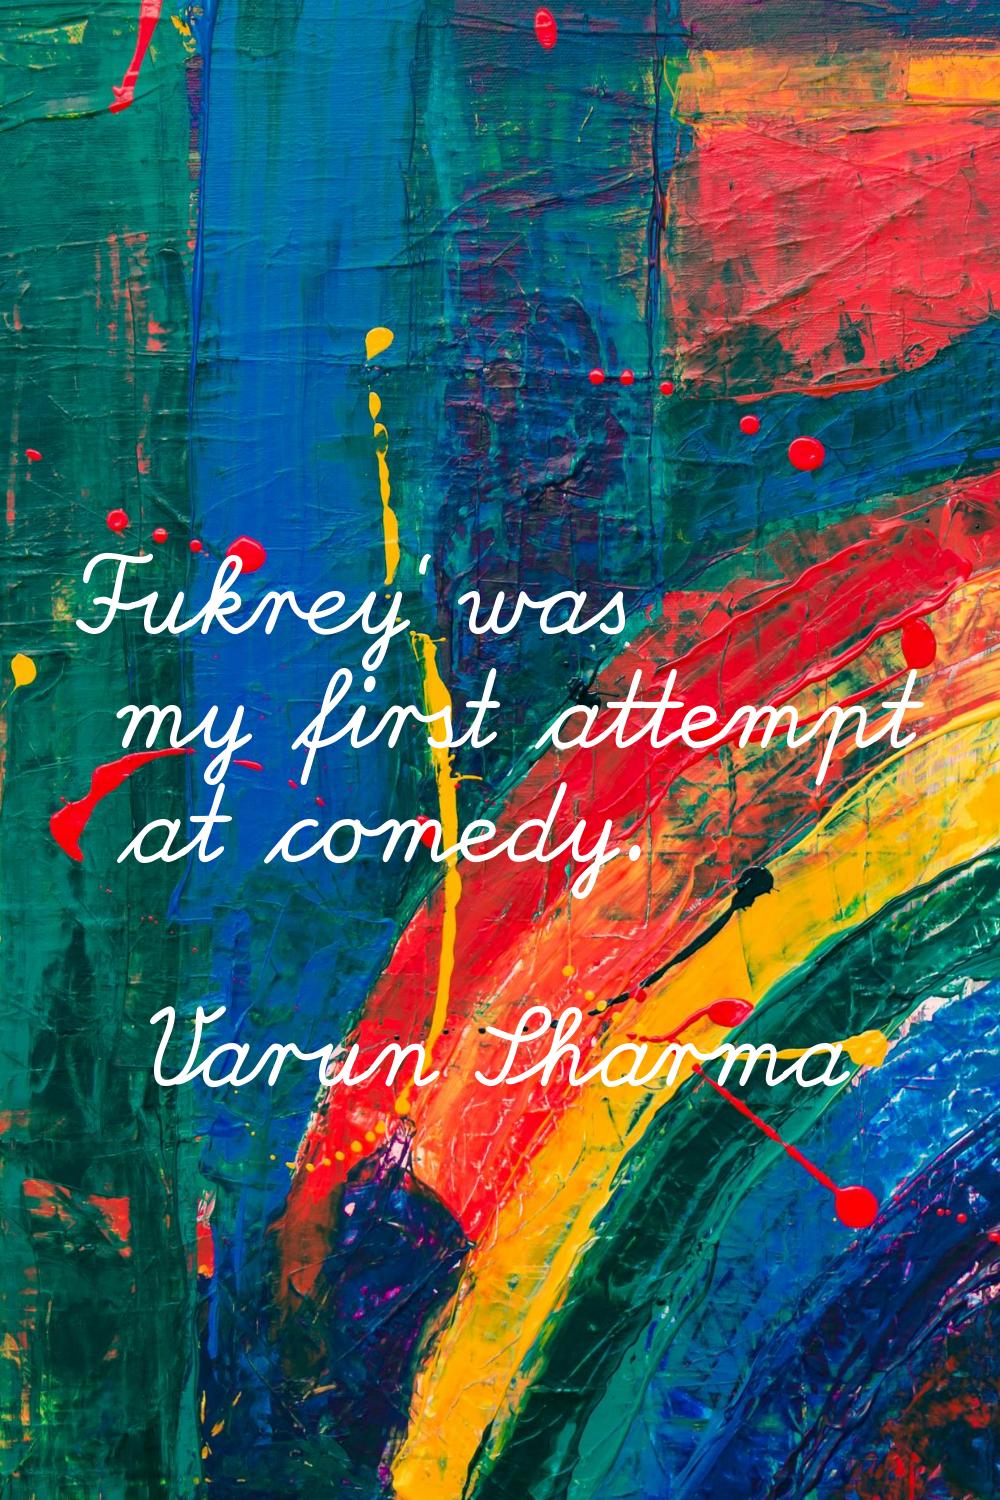 Fukrey' was my first attempt at comedy.